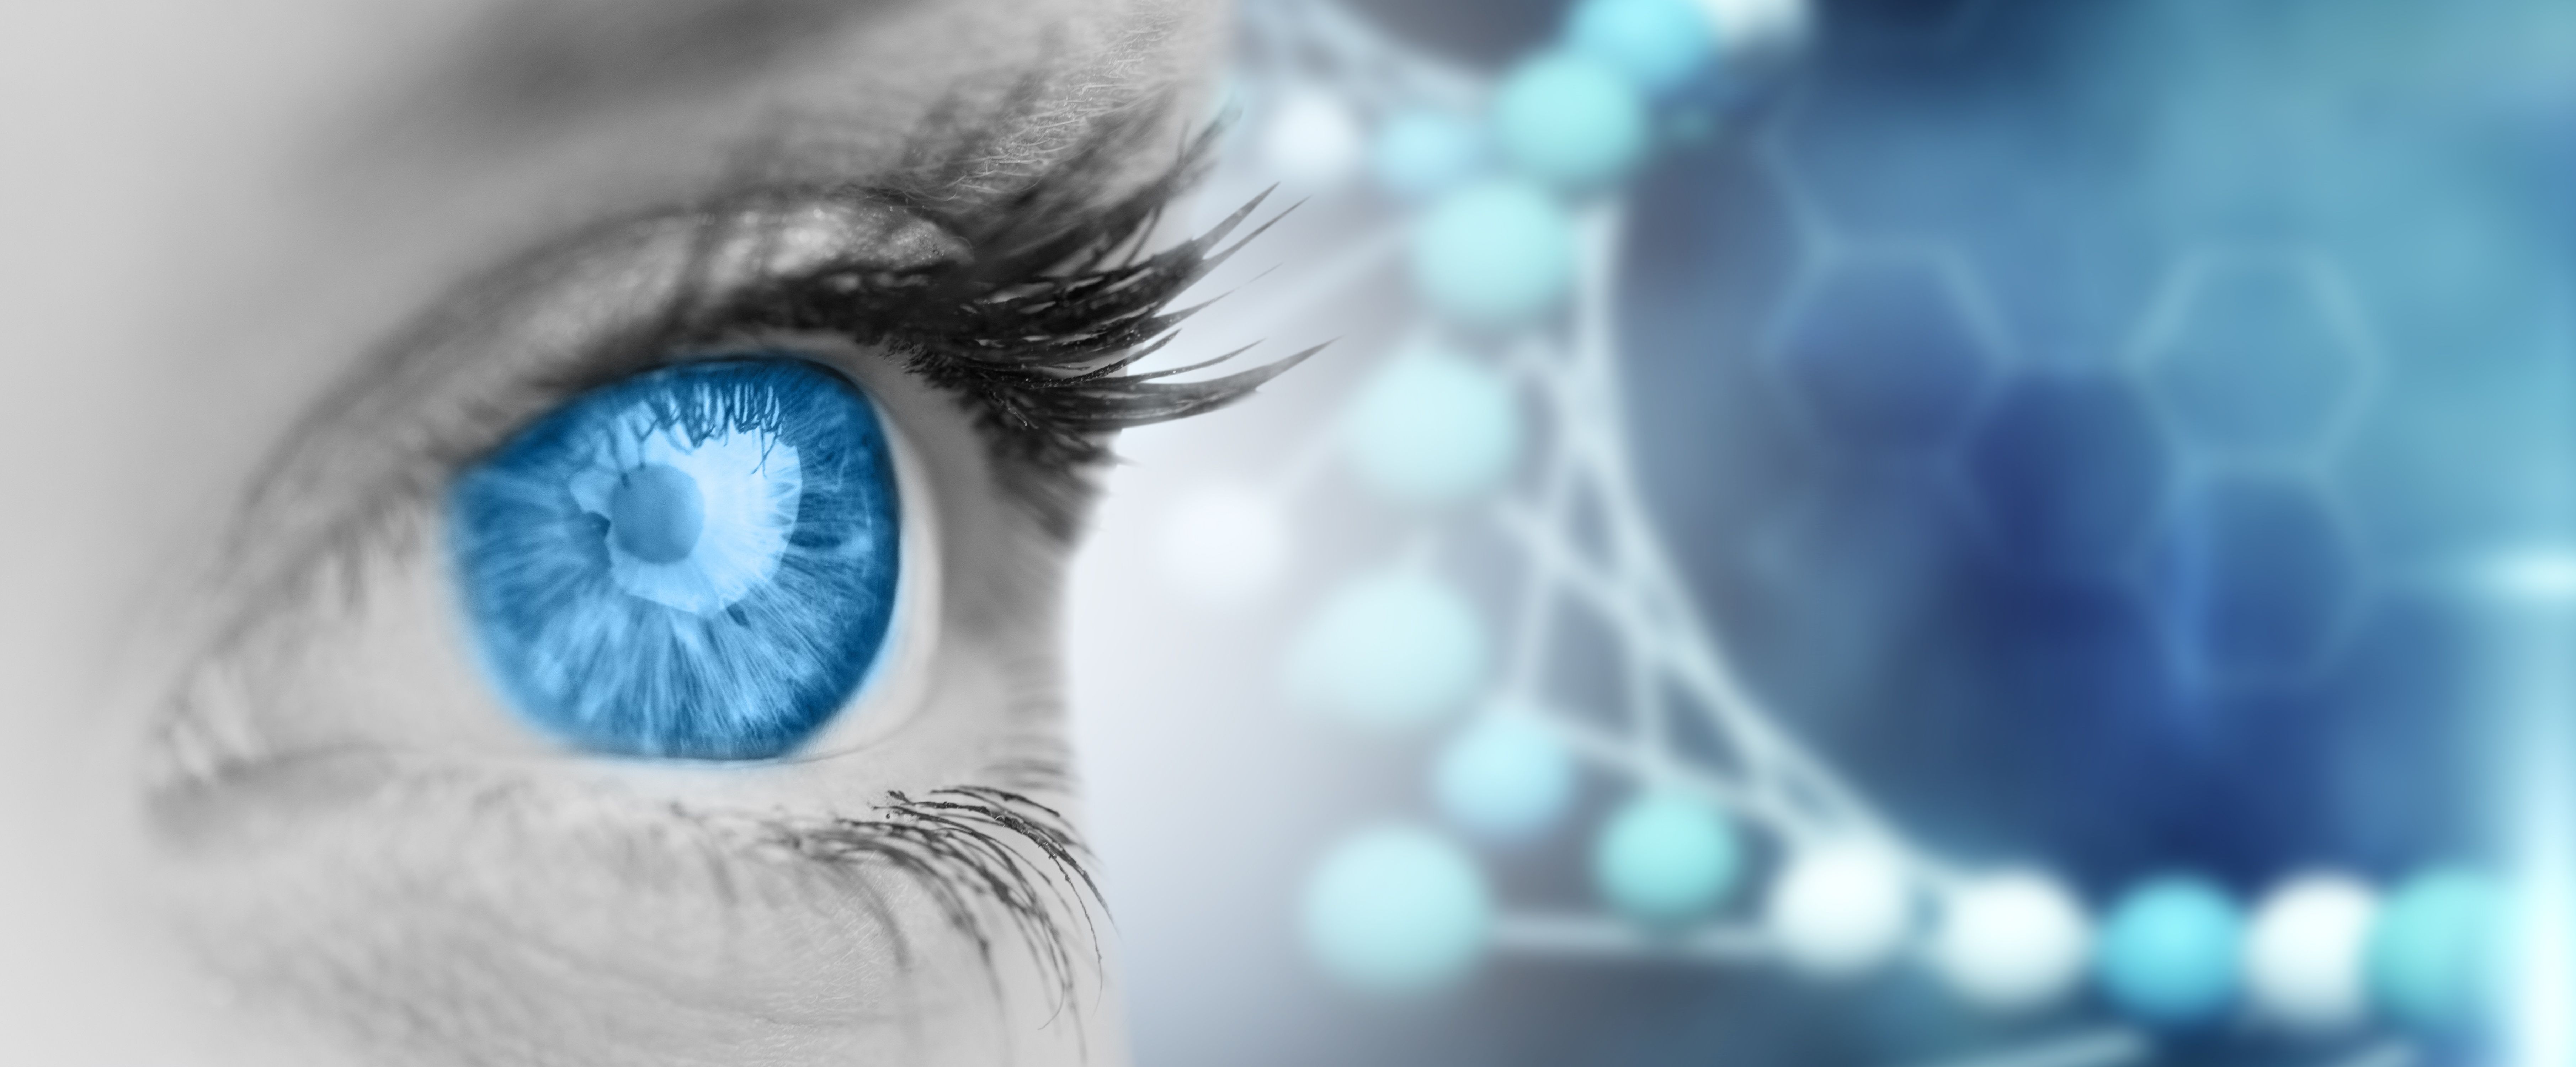 Research suggests course of diabetic eye disease influenced by genetic factors